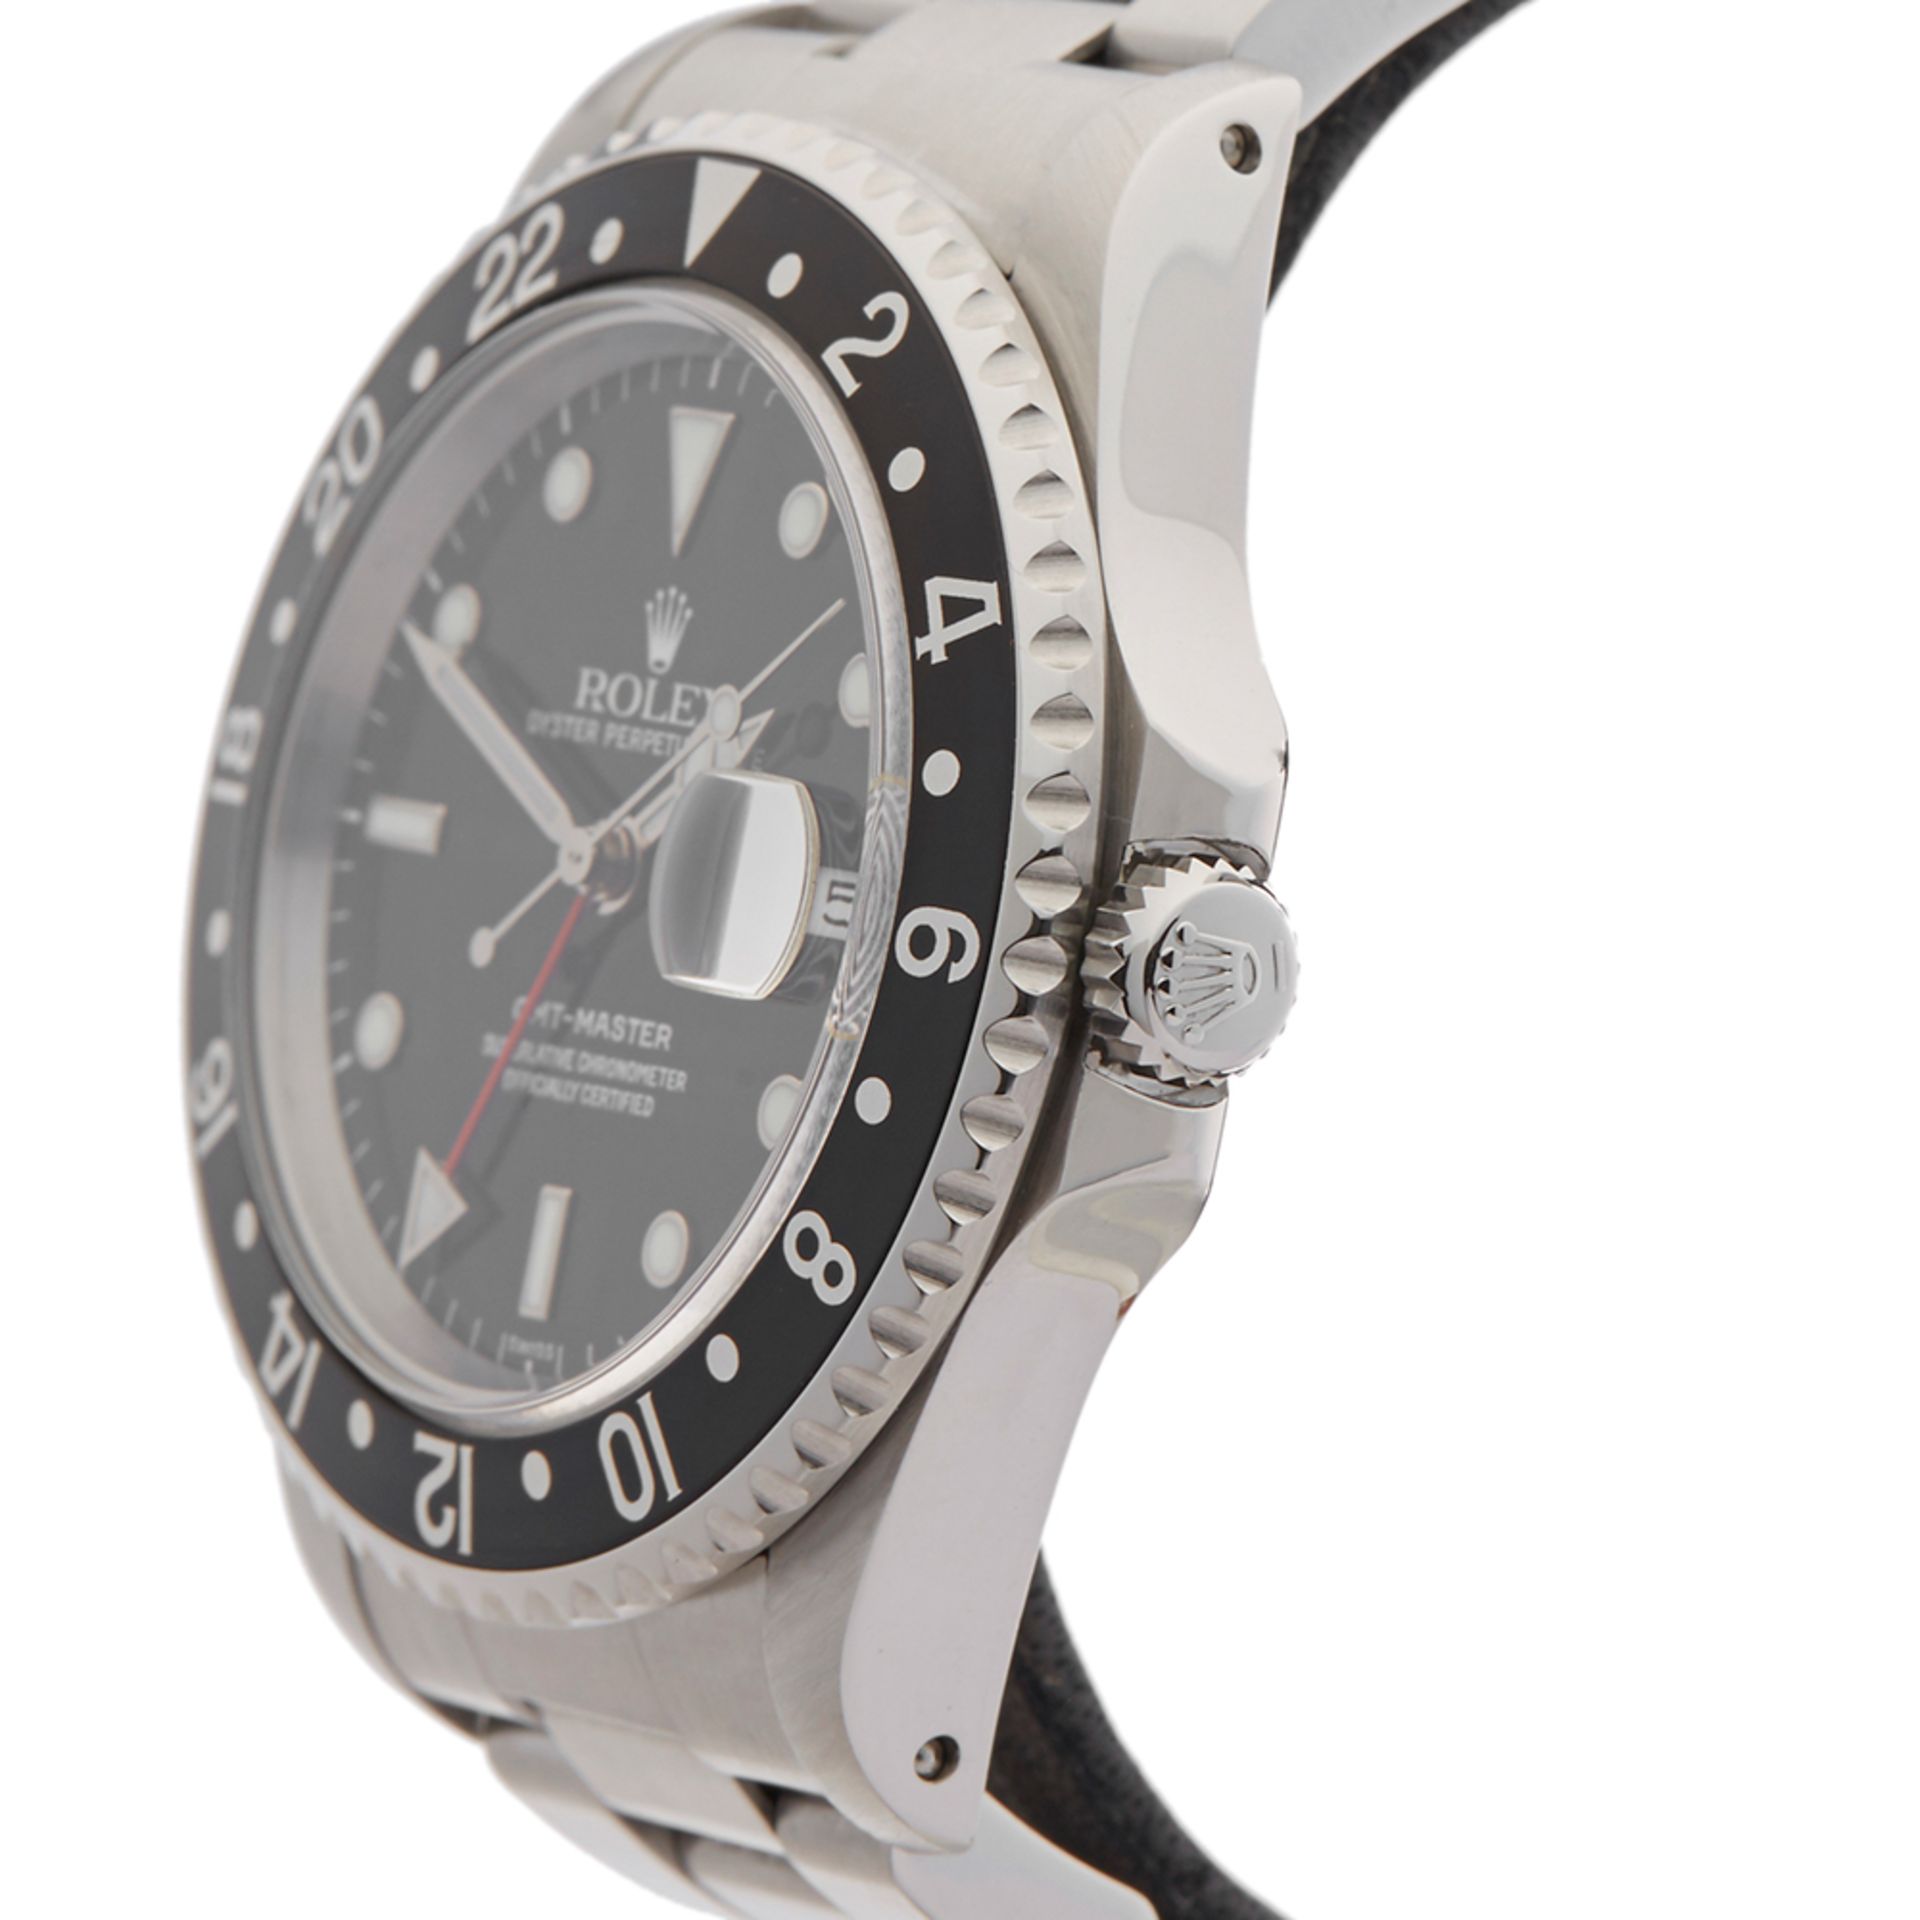 GMT-Master 40mm Stainless Steel - 16700 - Image 4 of 9